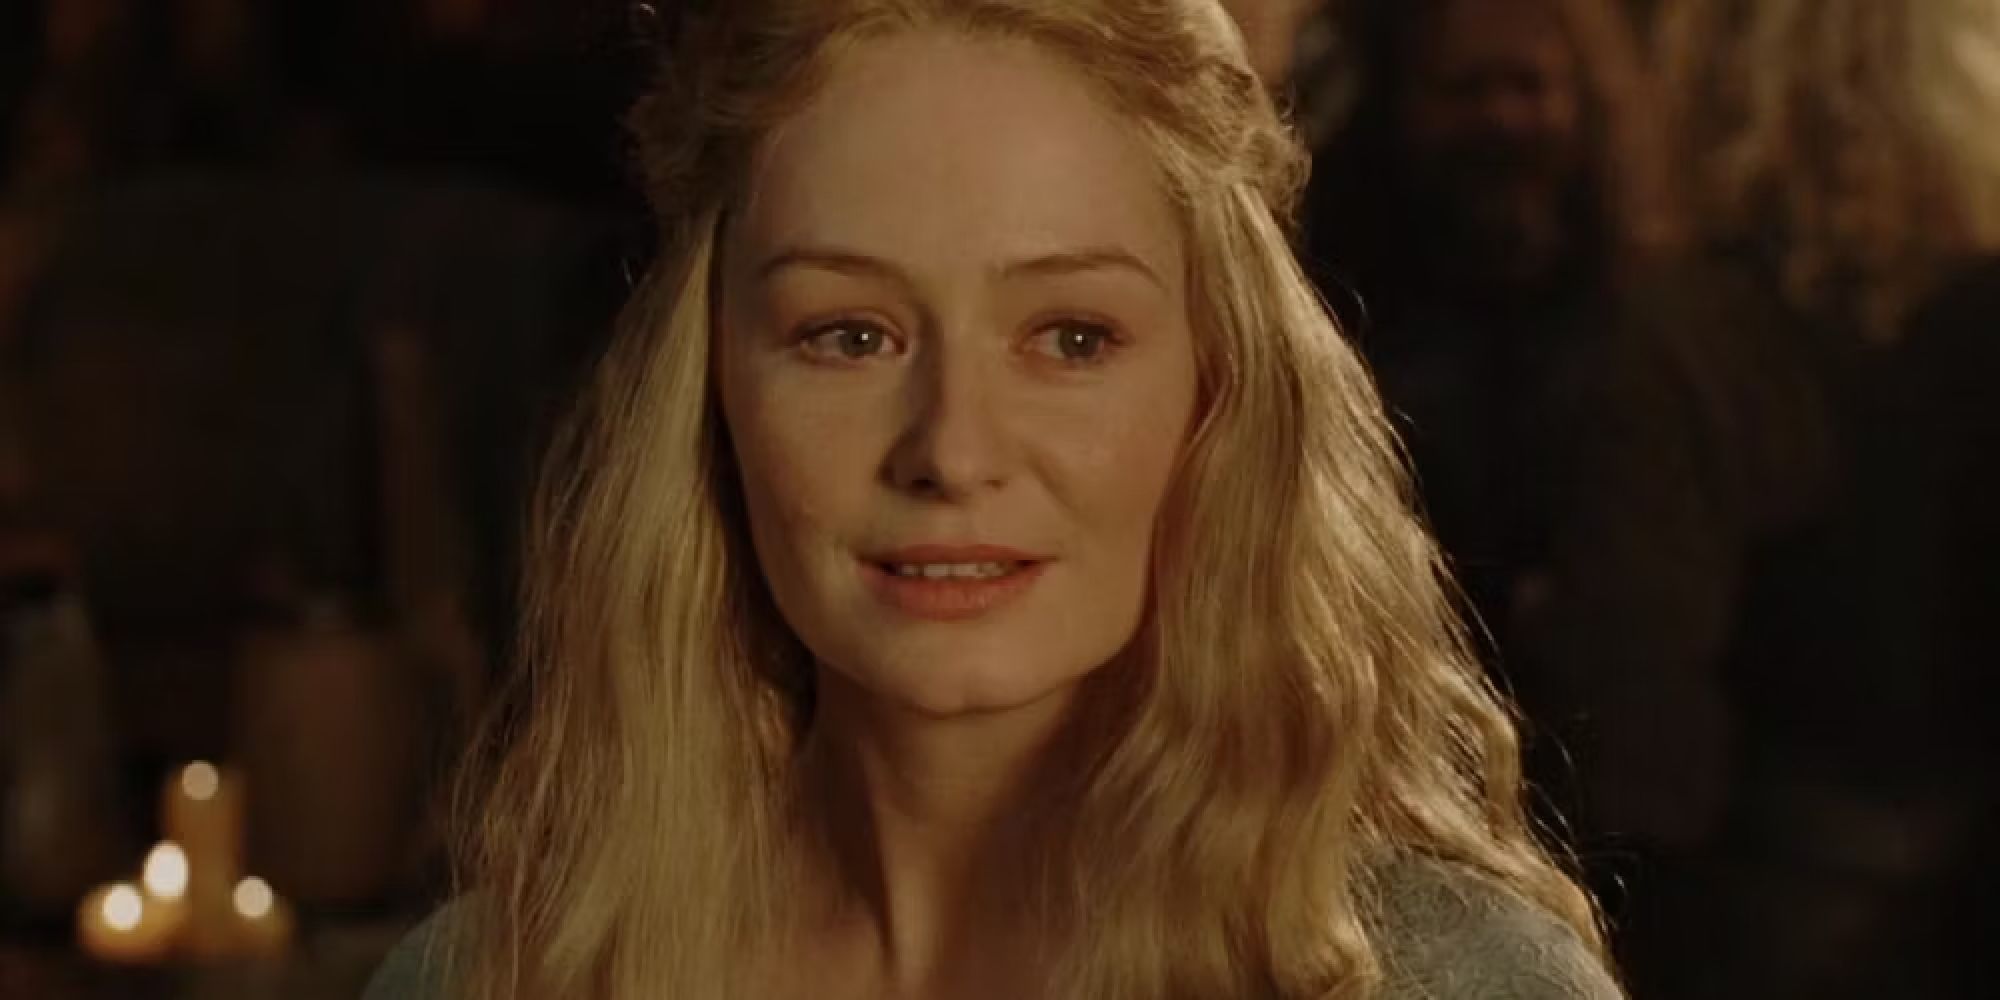 Lord of the Rings Eowyn with an expression of soft serenity